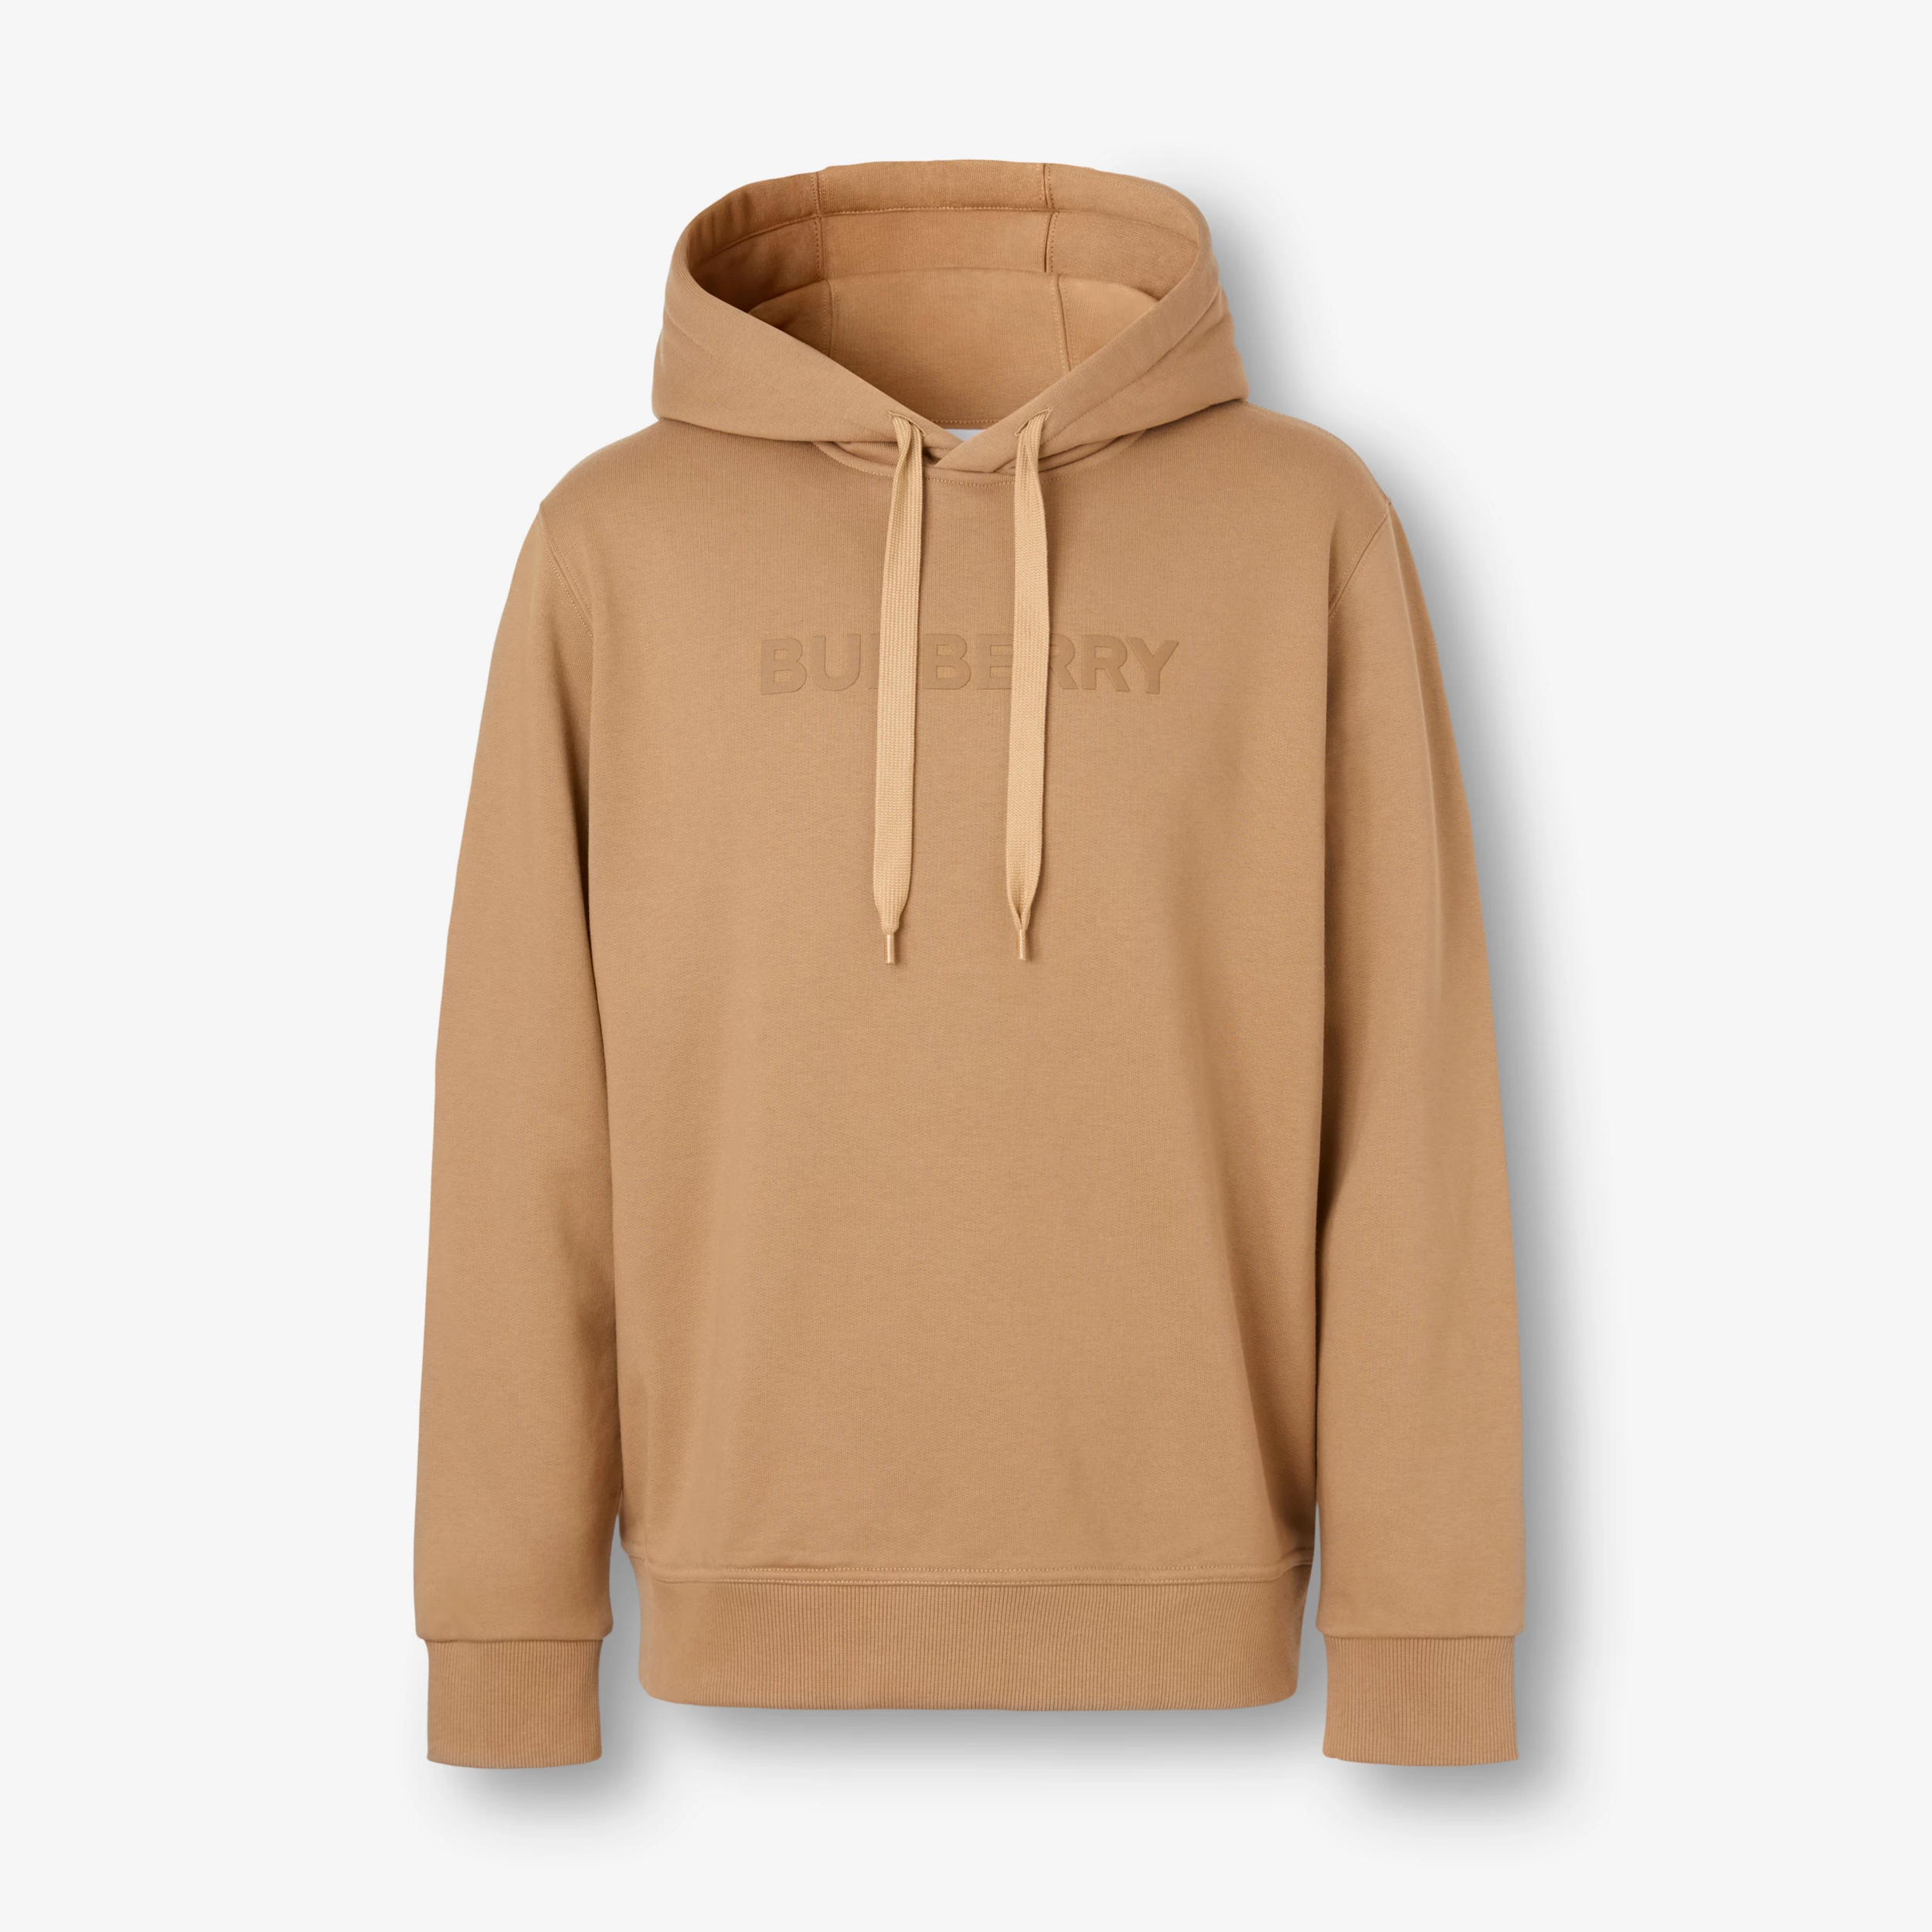 Dulcebonito Hoodies Collection